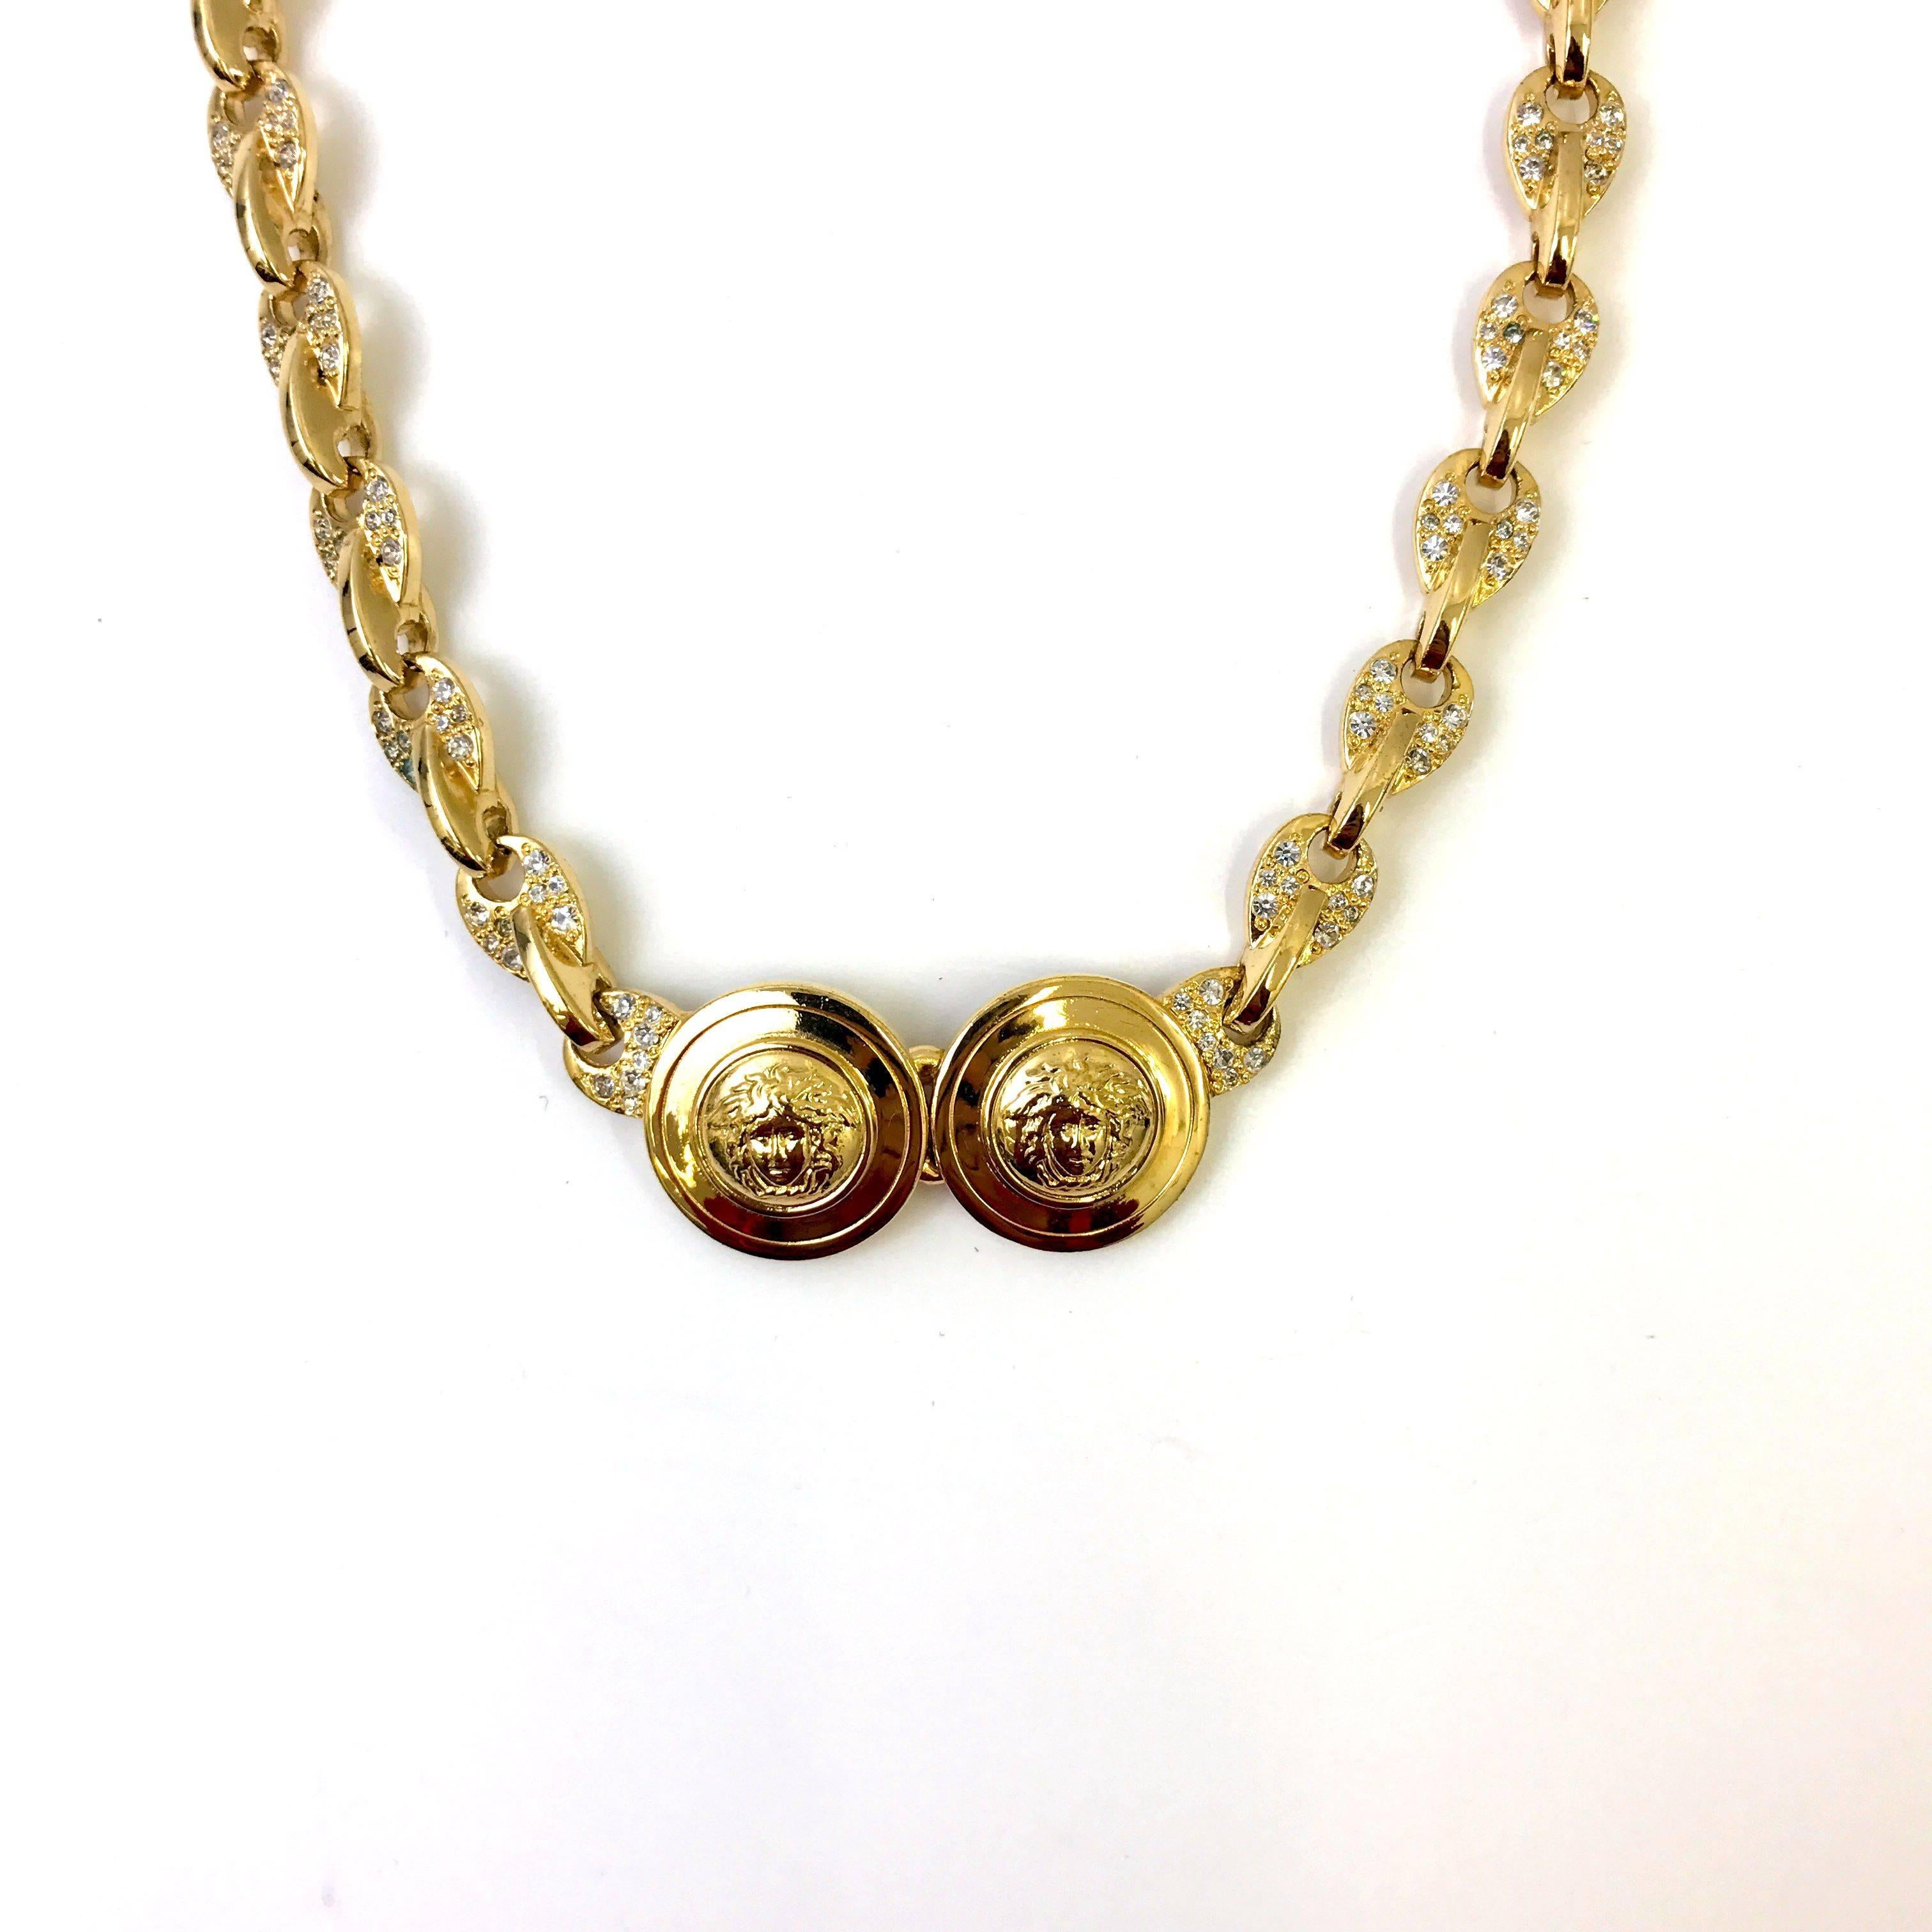 This is a iconic necklace from the famous Italian designer Gianni Versace from the 1990s. The necklace features a gold toned metal chain with a unique style link covered in rhinestones. In the centre of the chain there are two circle medallions with